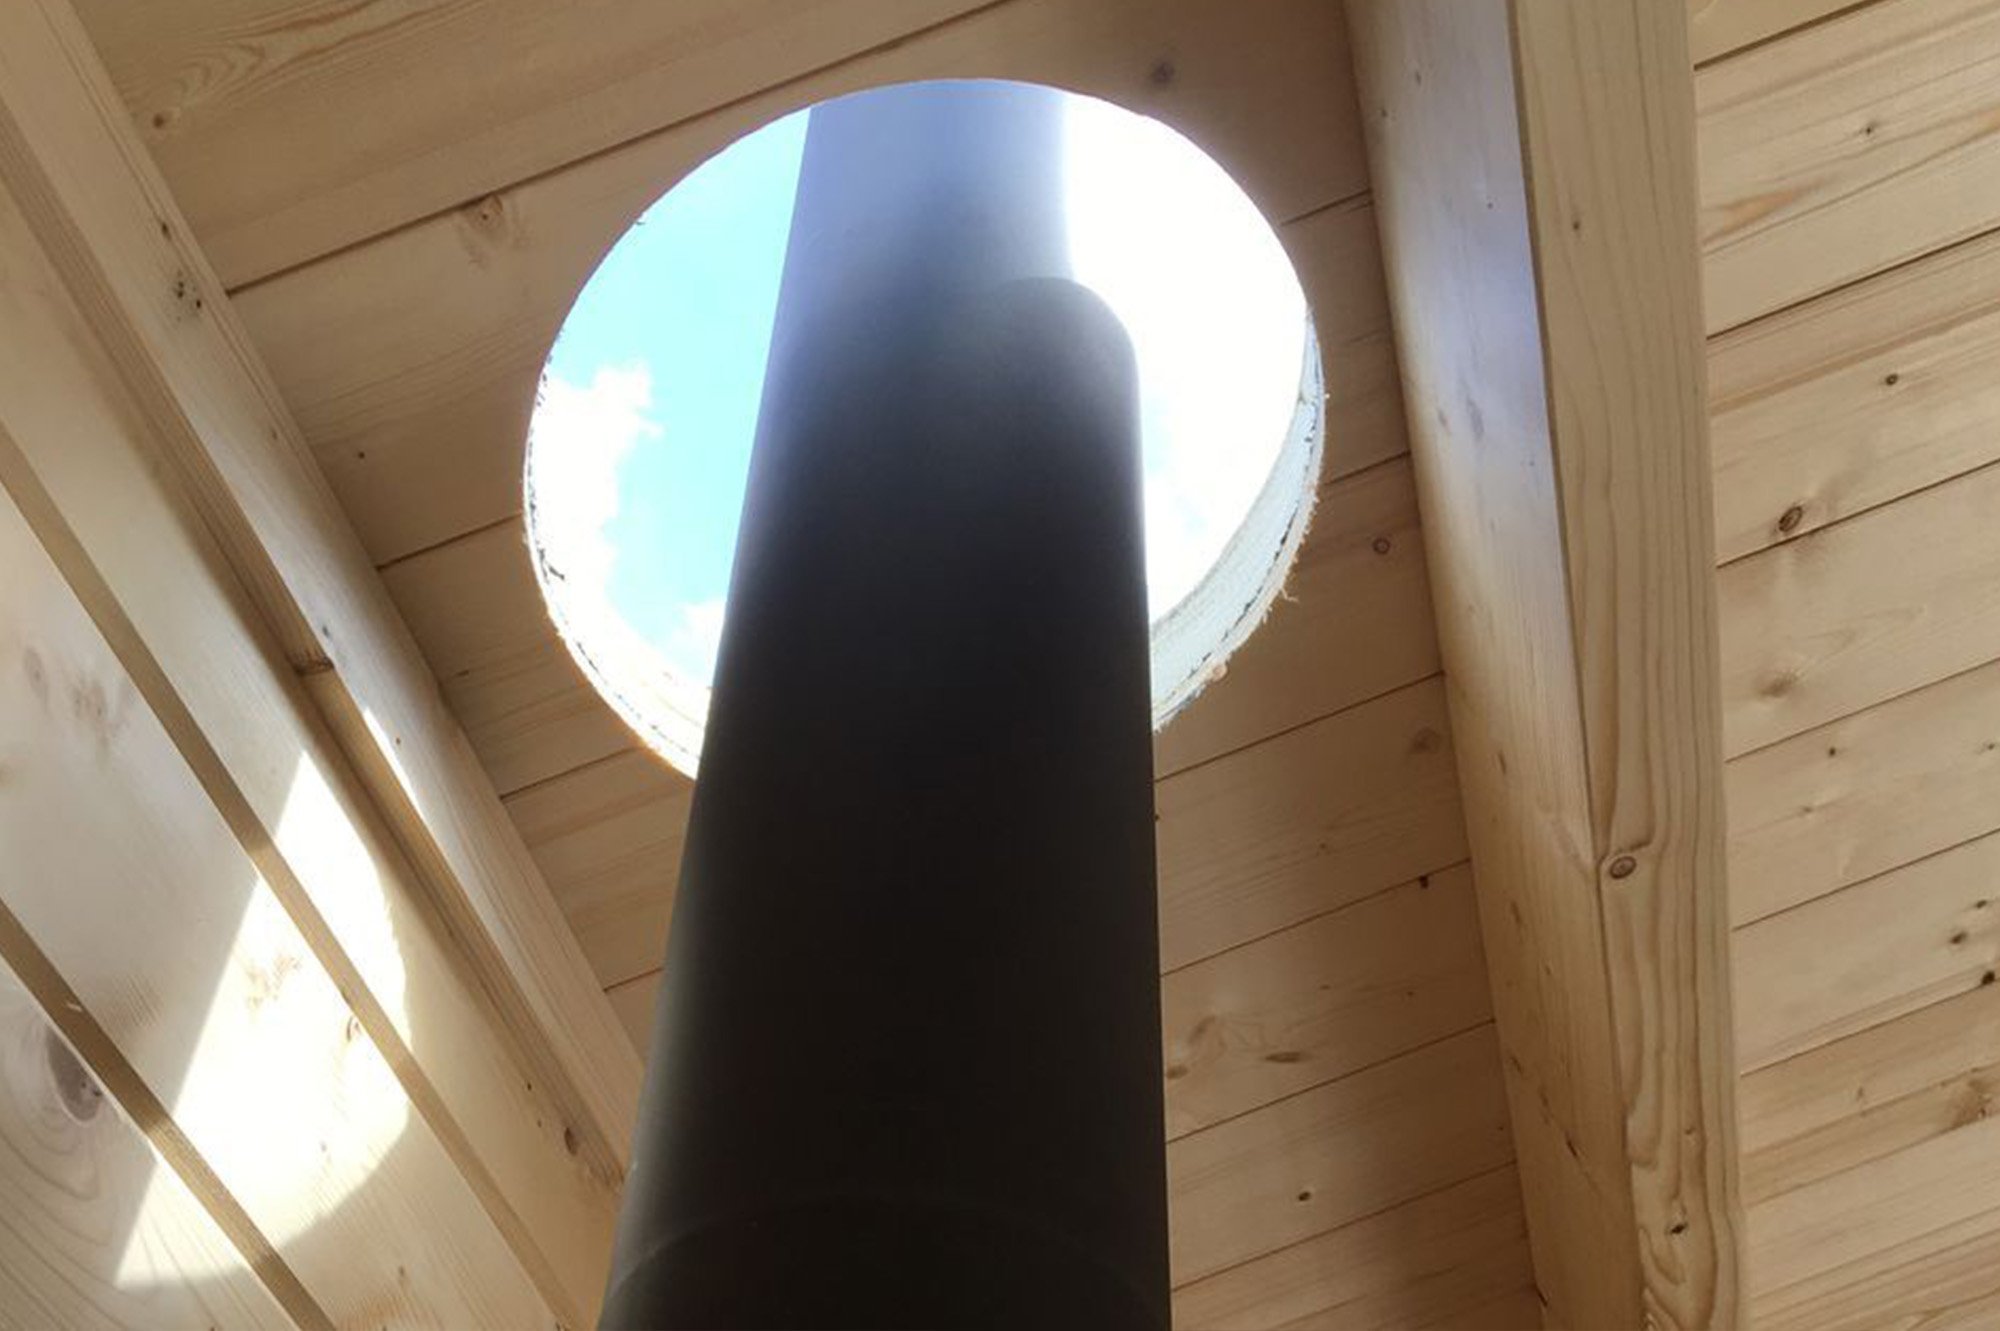 A 310mm diameter hole is machined vertically through the roof structure